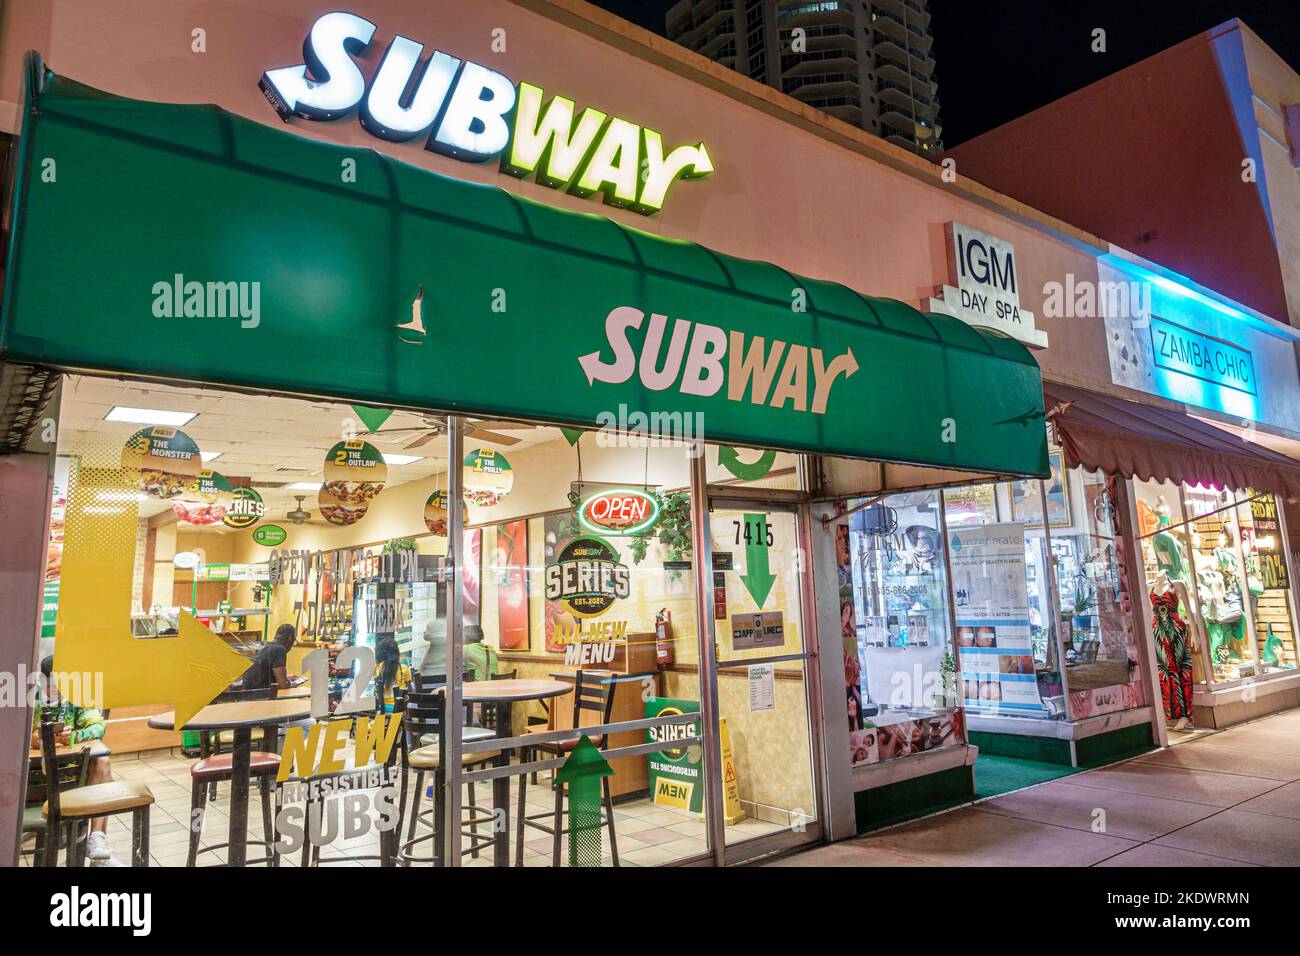 Miami Beach Florida,North Beach Collins Avenue night nightlife,Subway sandwich shop restaurant restaurants dine dining eating out casual cafe cafes bi Stock Photo